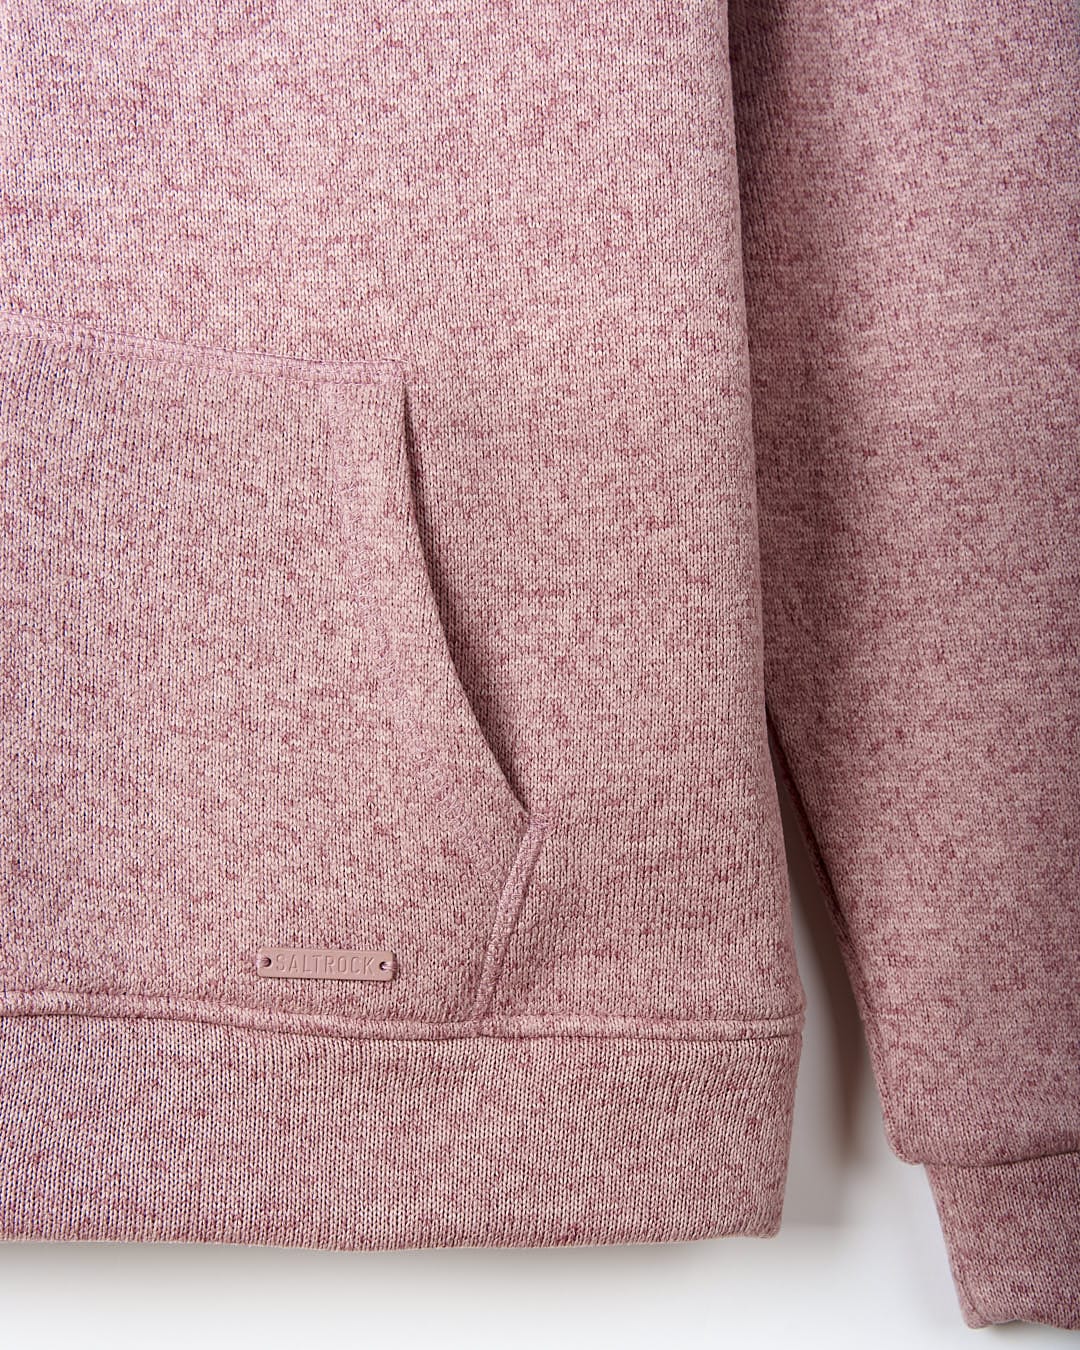 A close up of a Saltrock Galak - Womens Fur Lined Hoody - Pink, providing comfort and adventure.